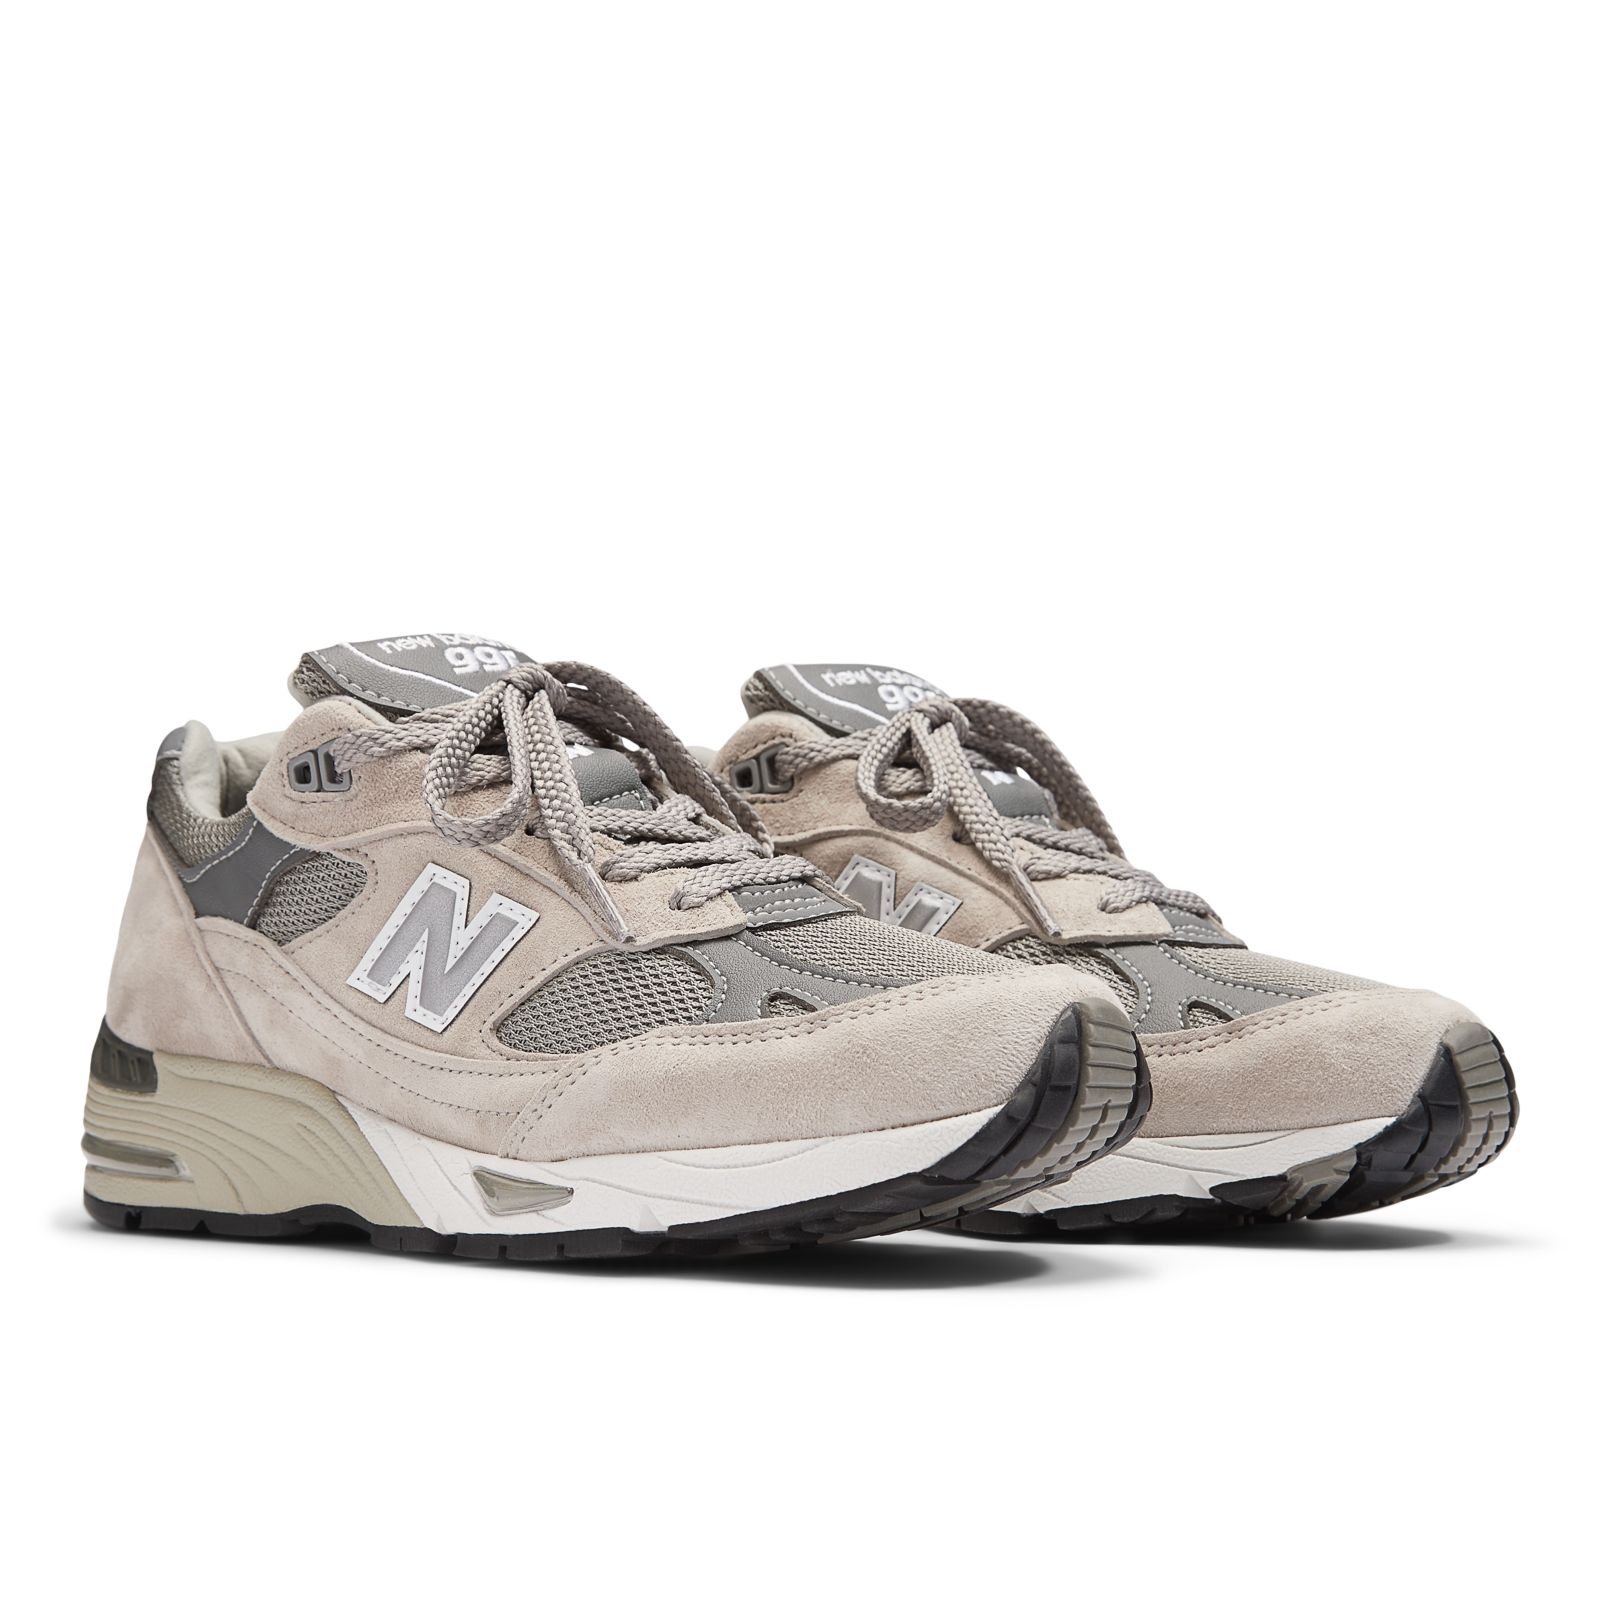 Women's MADE in UK 991v1 Shoes - New Balance